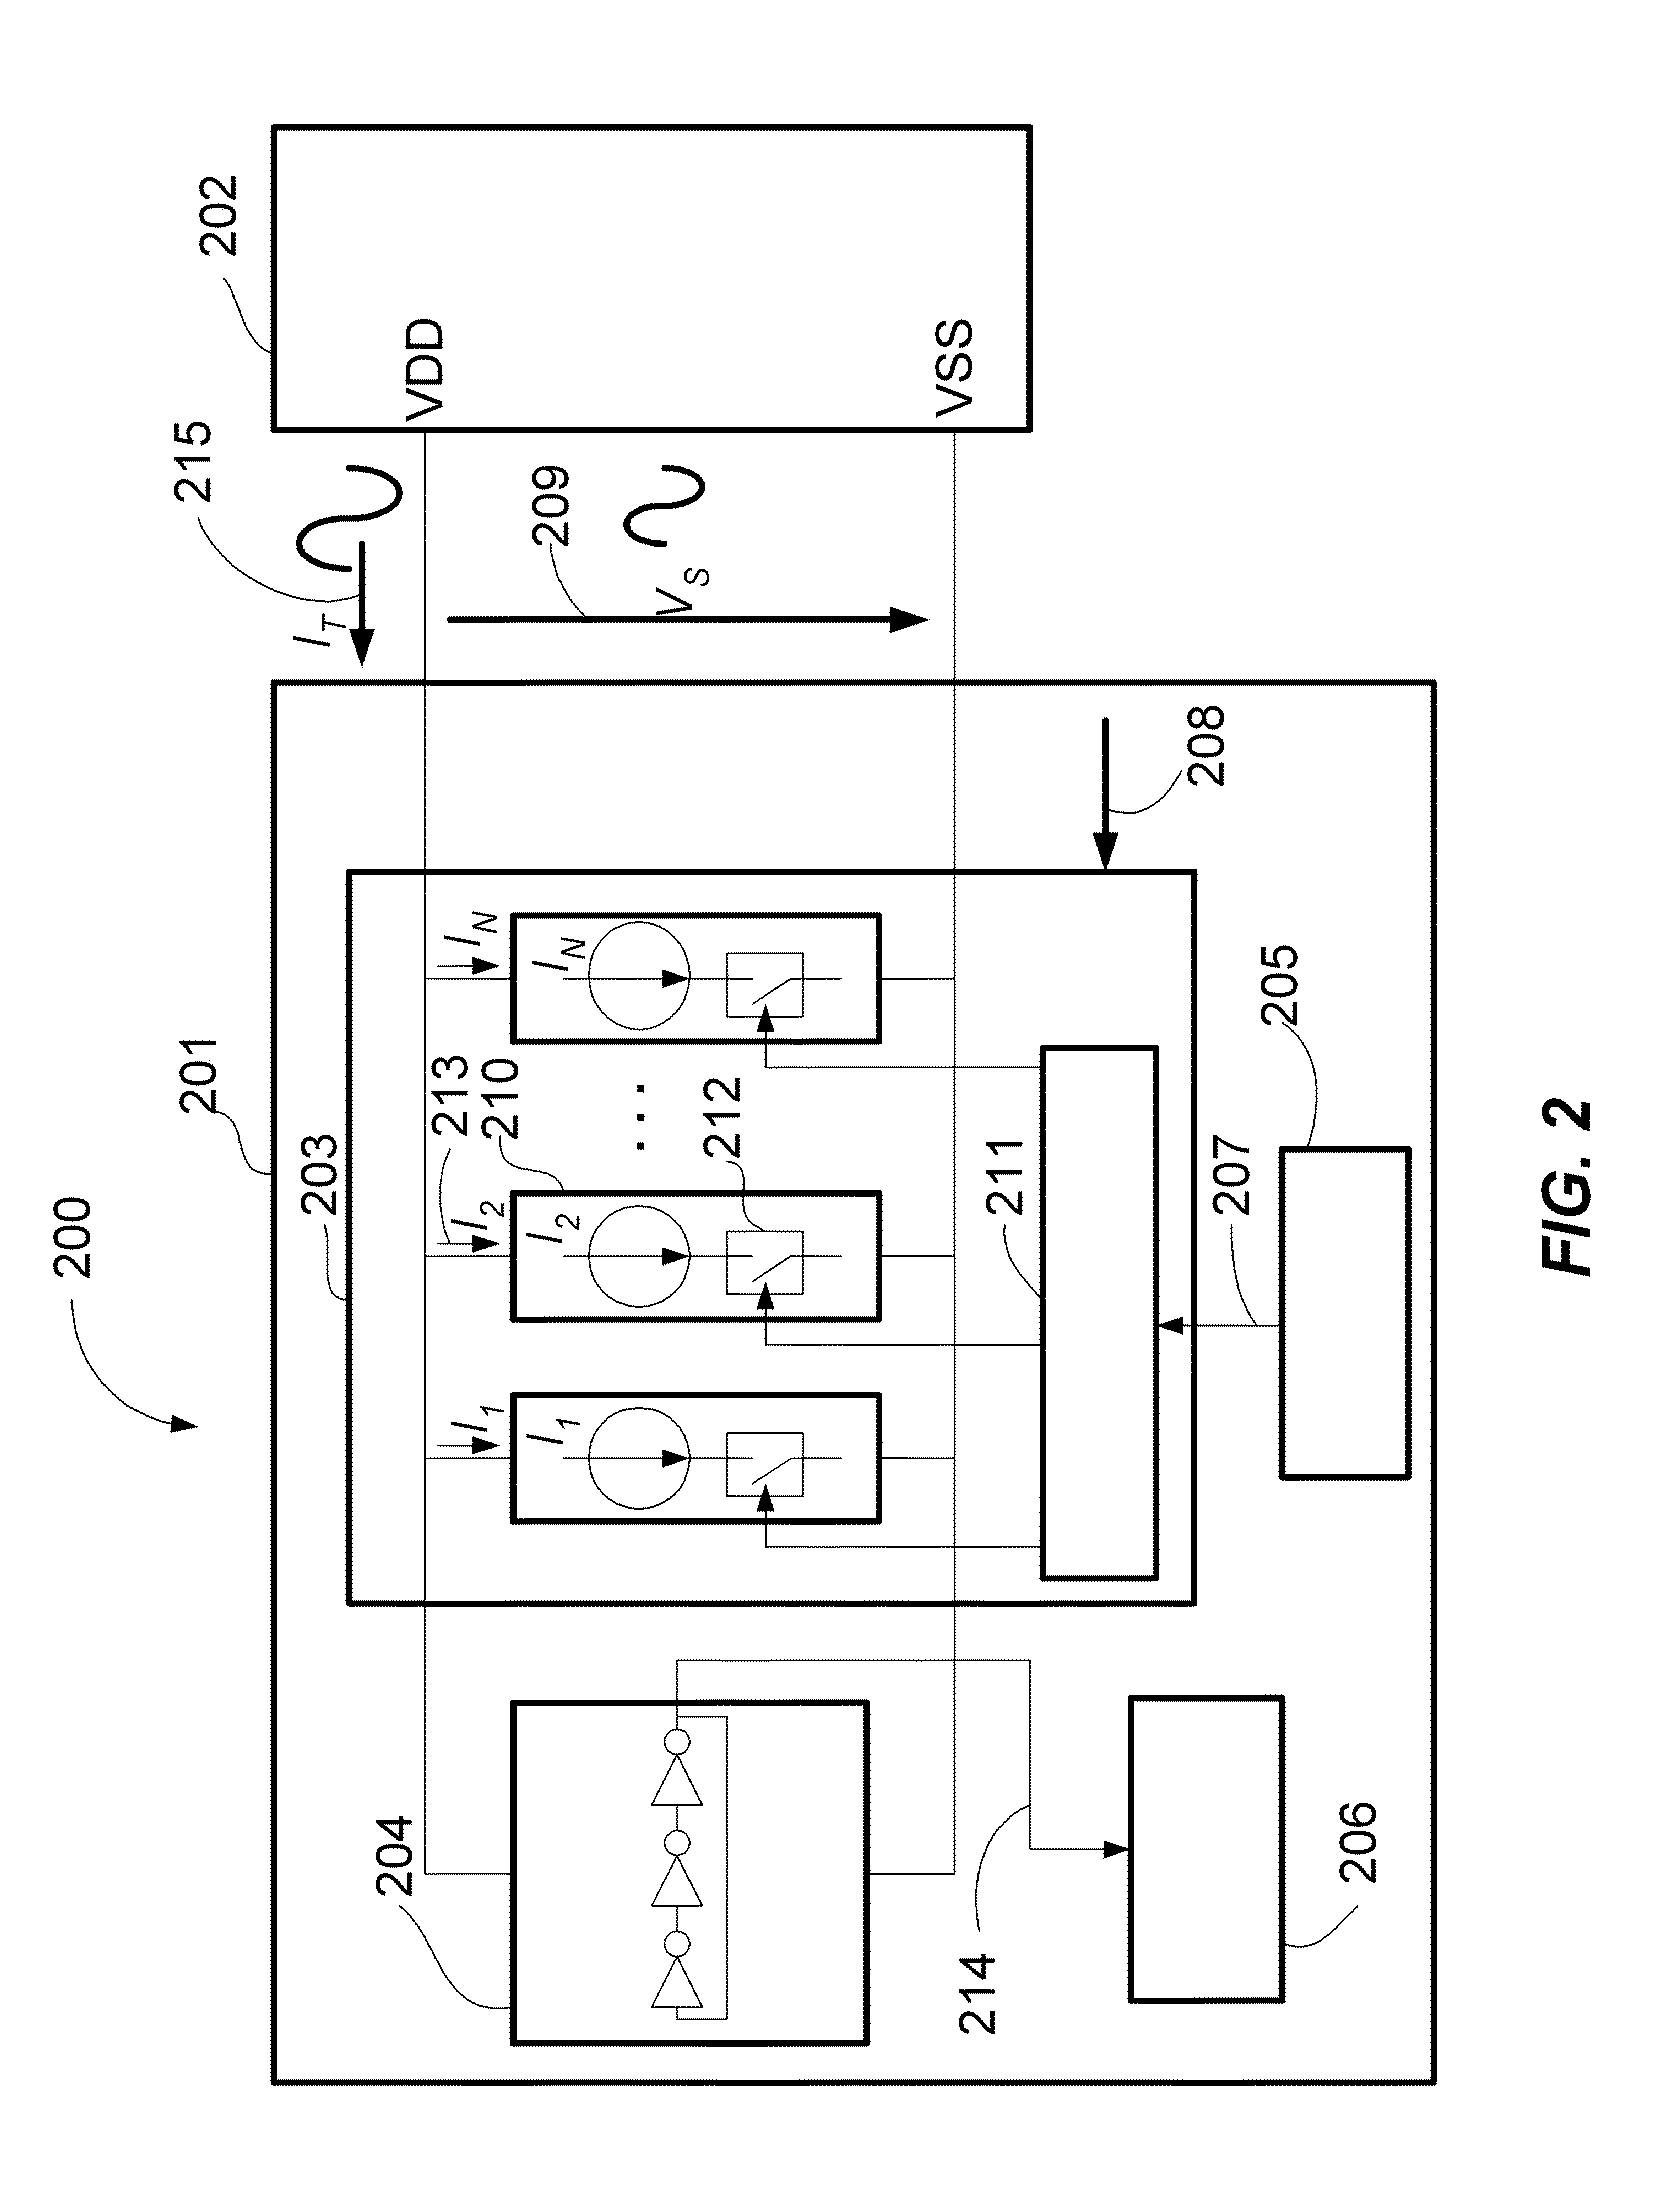 Method and system for measuring the impedance of the power distribution network in programmable logic device applications